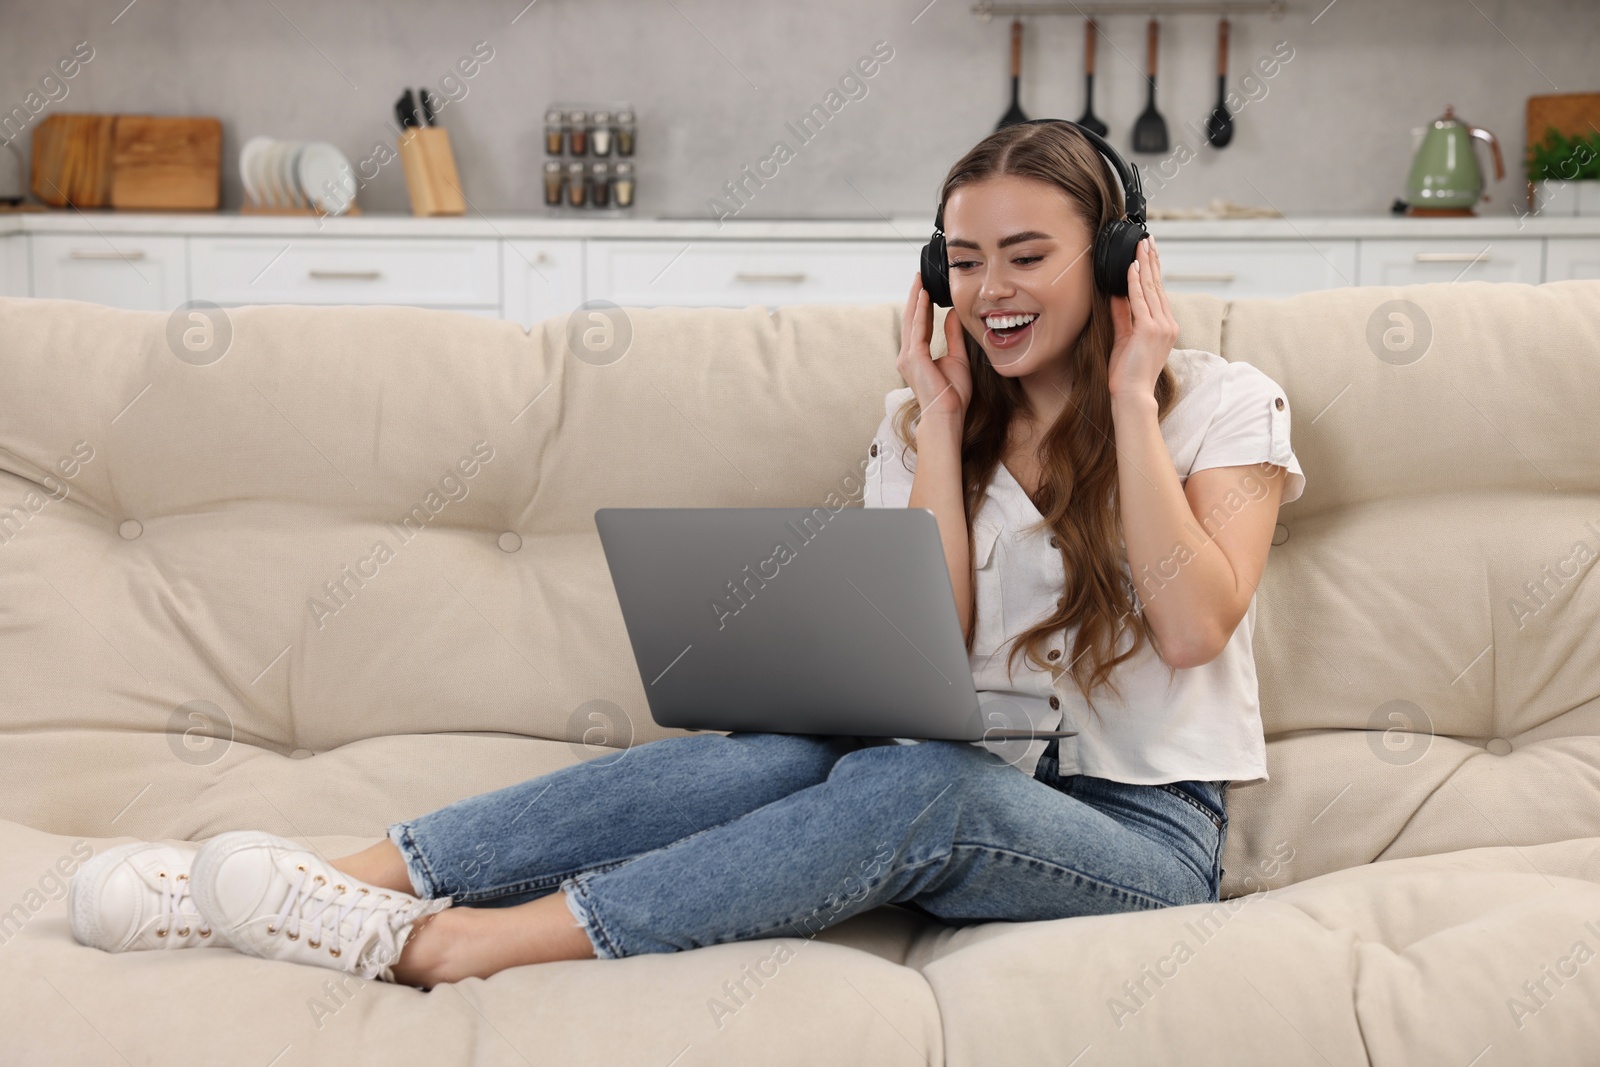 Photo of Happy woman with laptop listening to music in headphones on couch